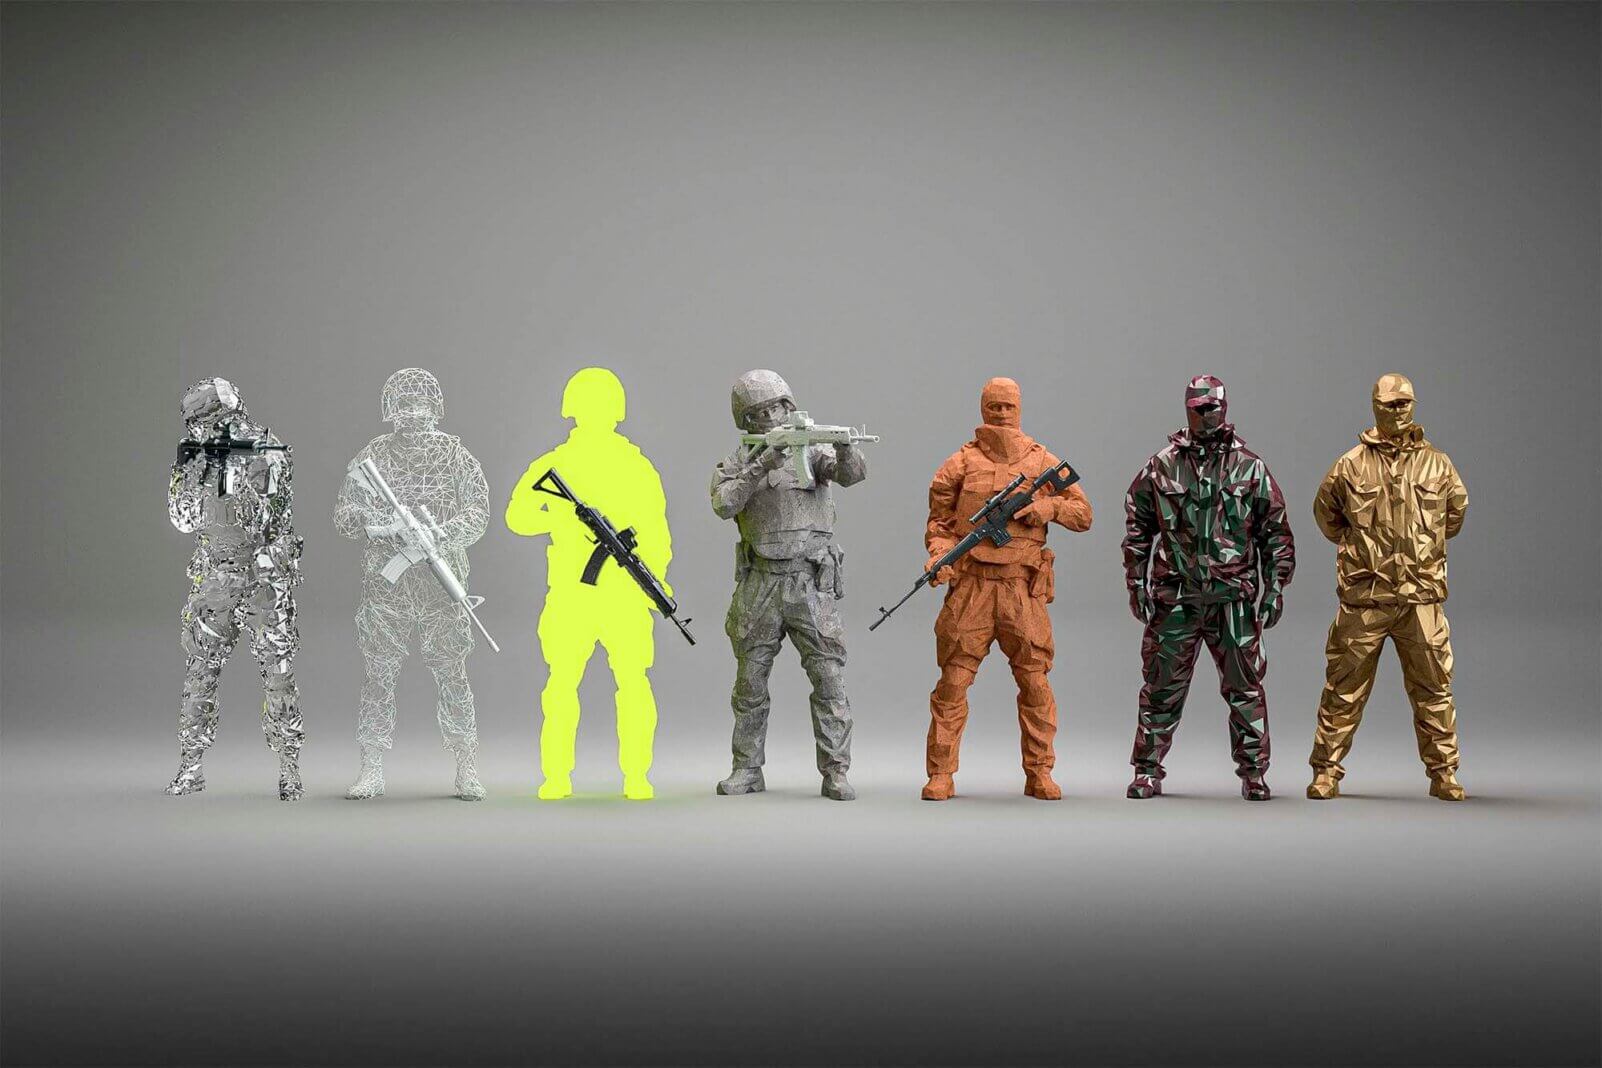 CGI Visualization of Special Forces Miniature Models by Studio Powers - An independent CGI Studio Based in Singapore Specializing In Product Visualization.